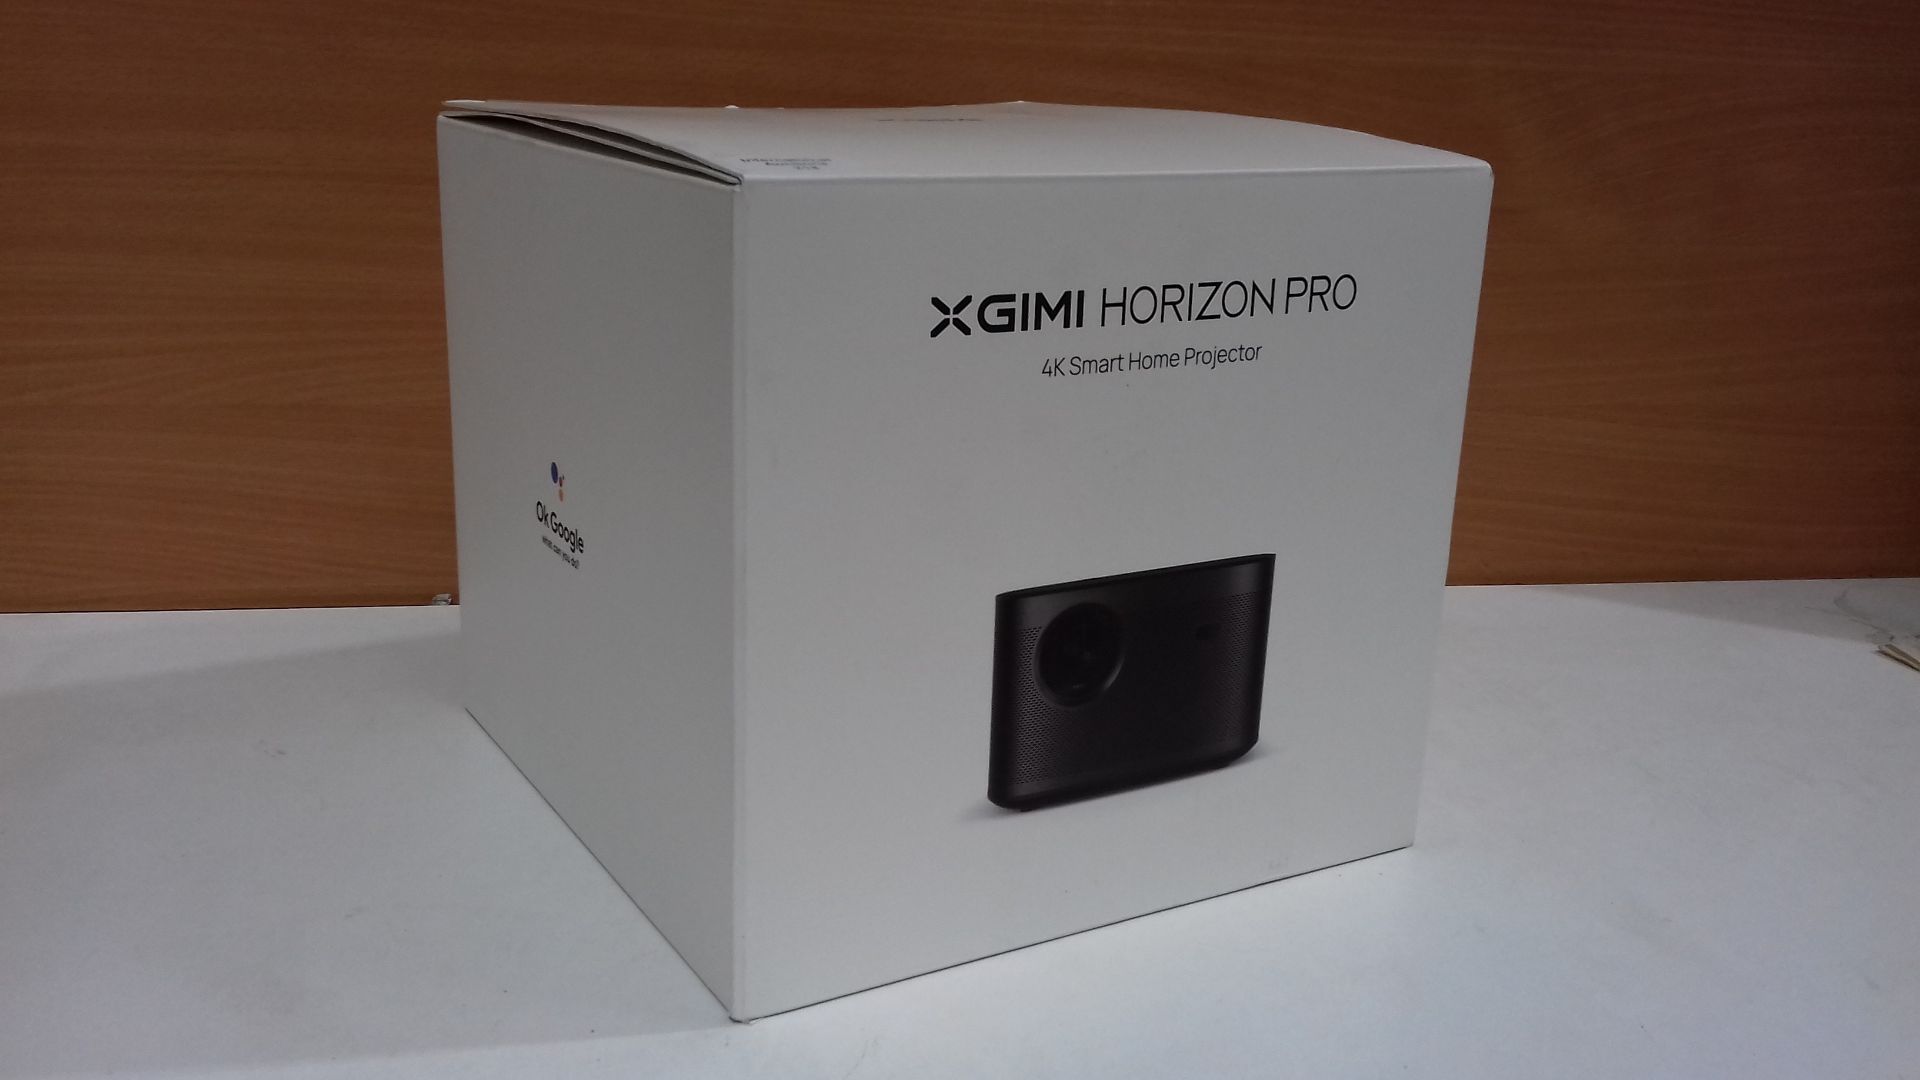 RRP £1549.00 XGIMI Horizon Pro 4K Smart Home Projector - Image 2 of 2